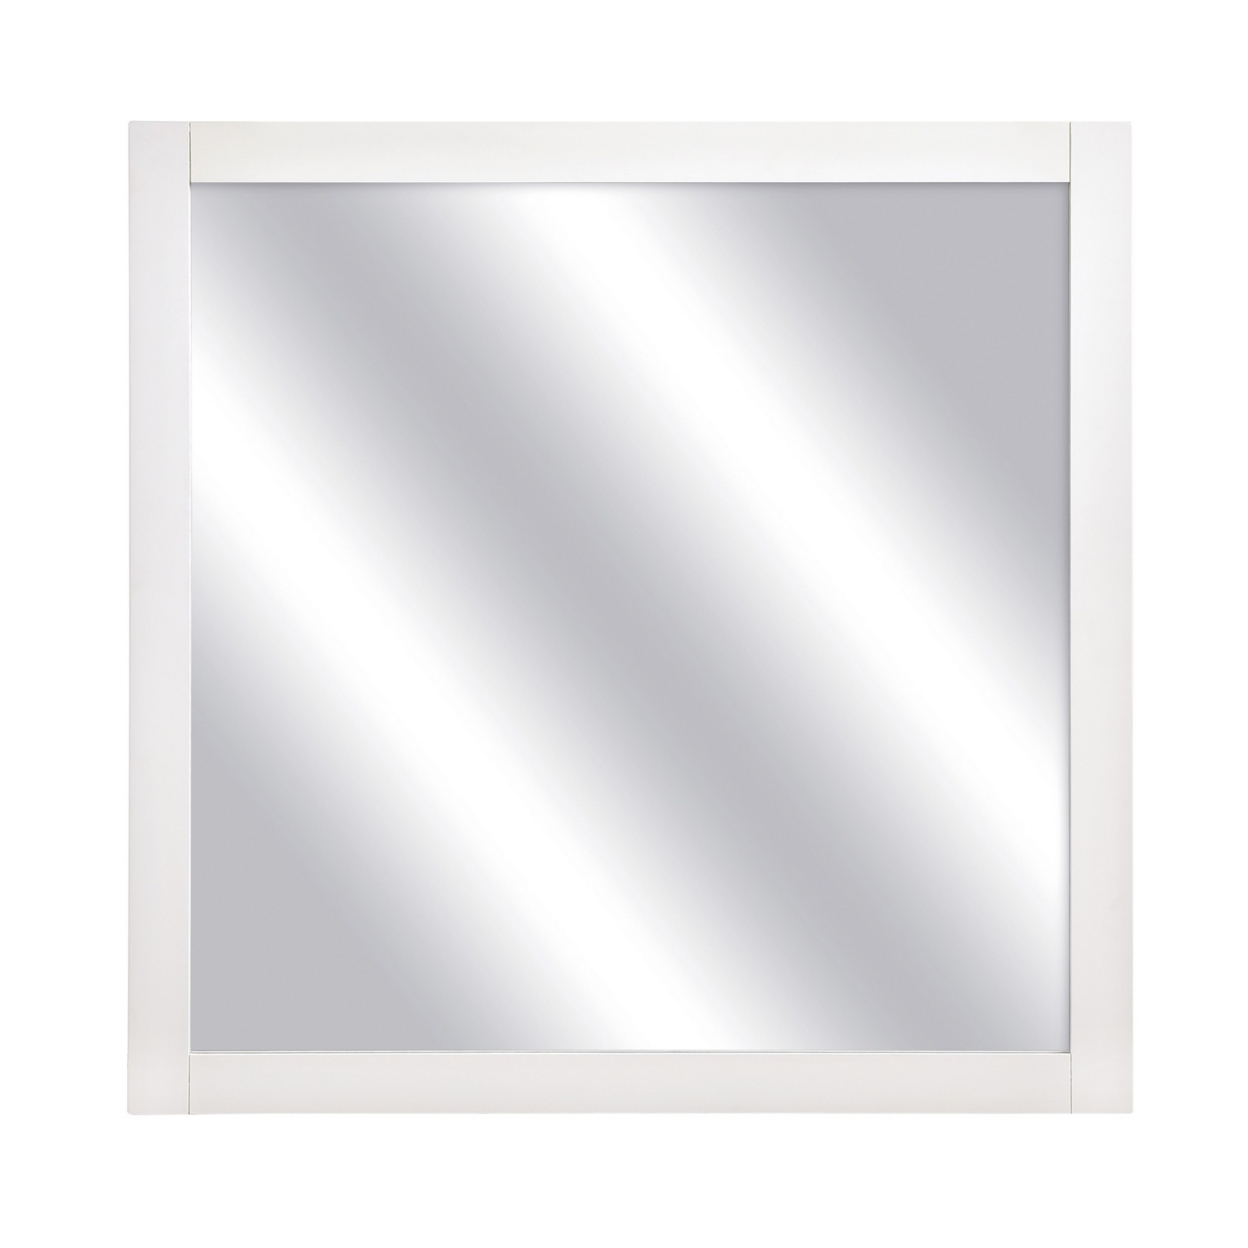 Square Shape Wooden Frame Mirror With Mounting Hardware, White And Silver- Saltoro Sherpi